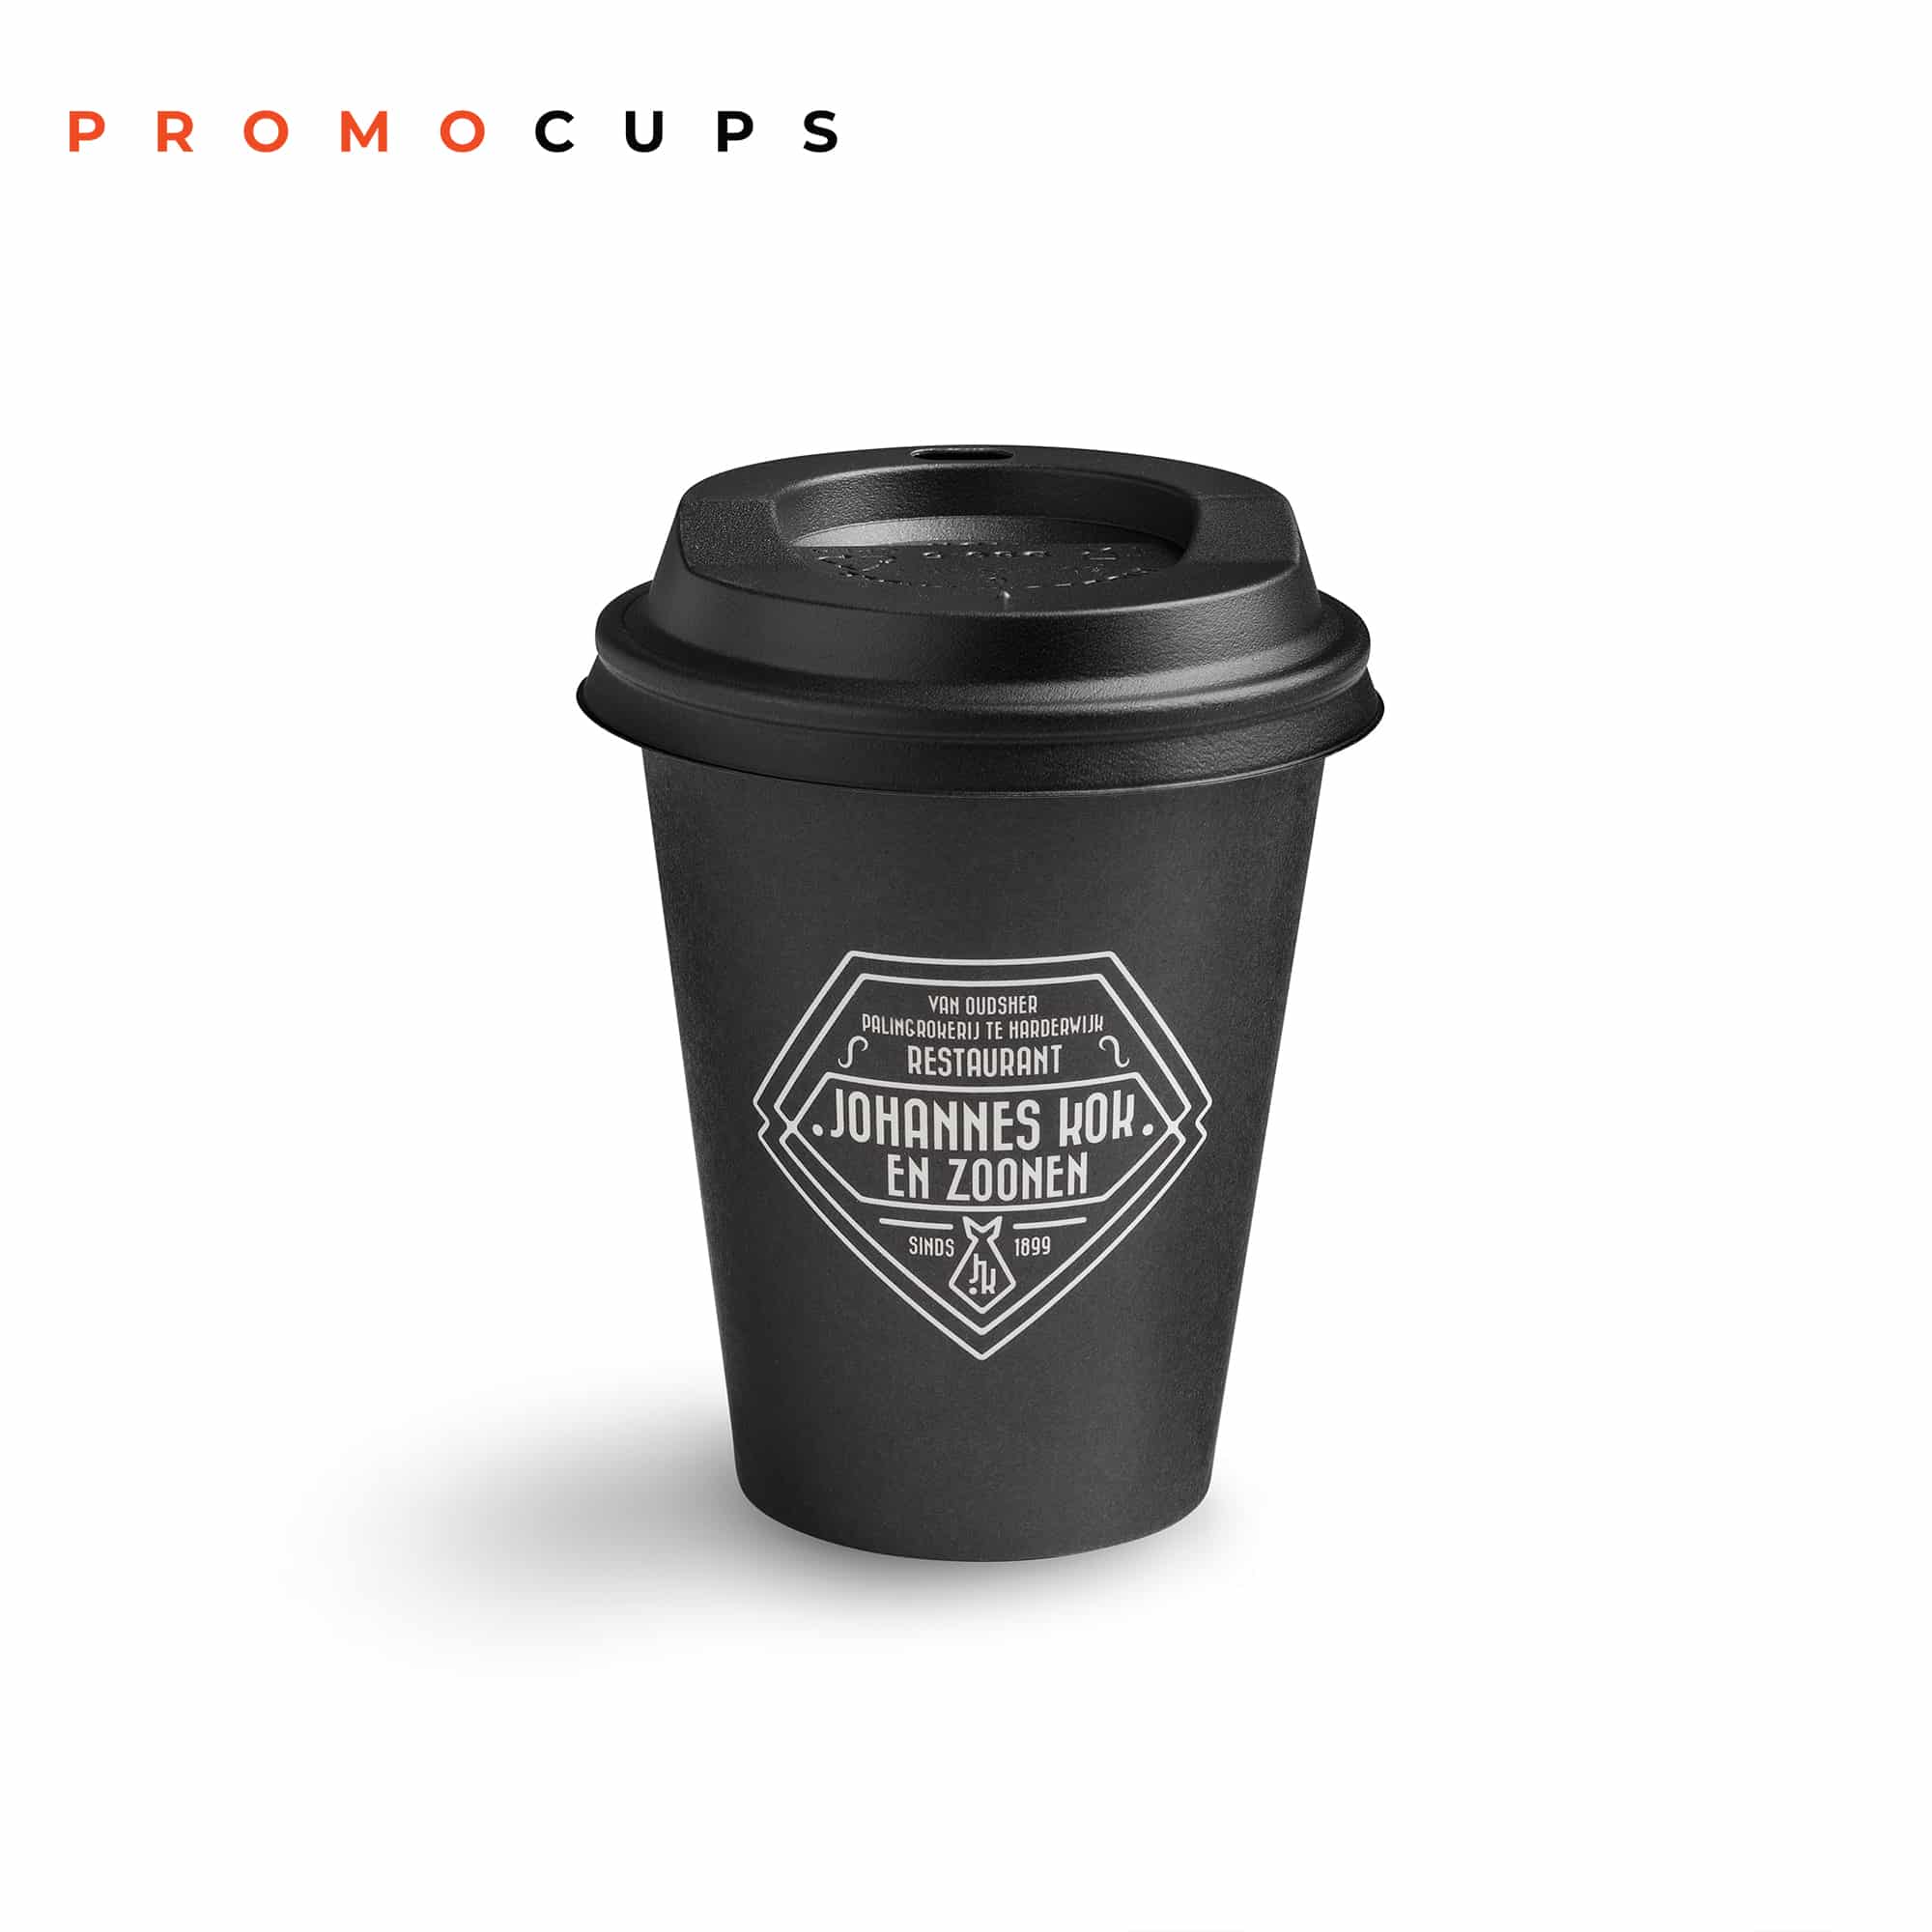 Promocups | How to use personalized coffee cups to promote your business at trade shows and events